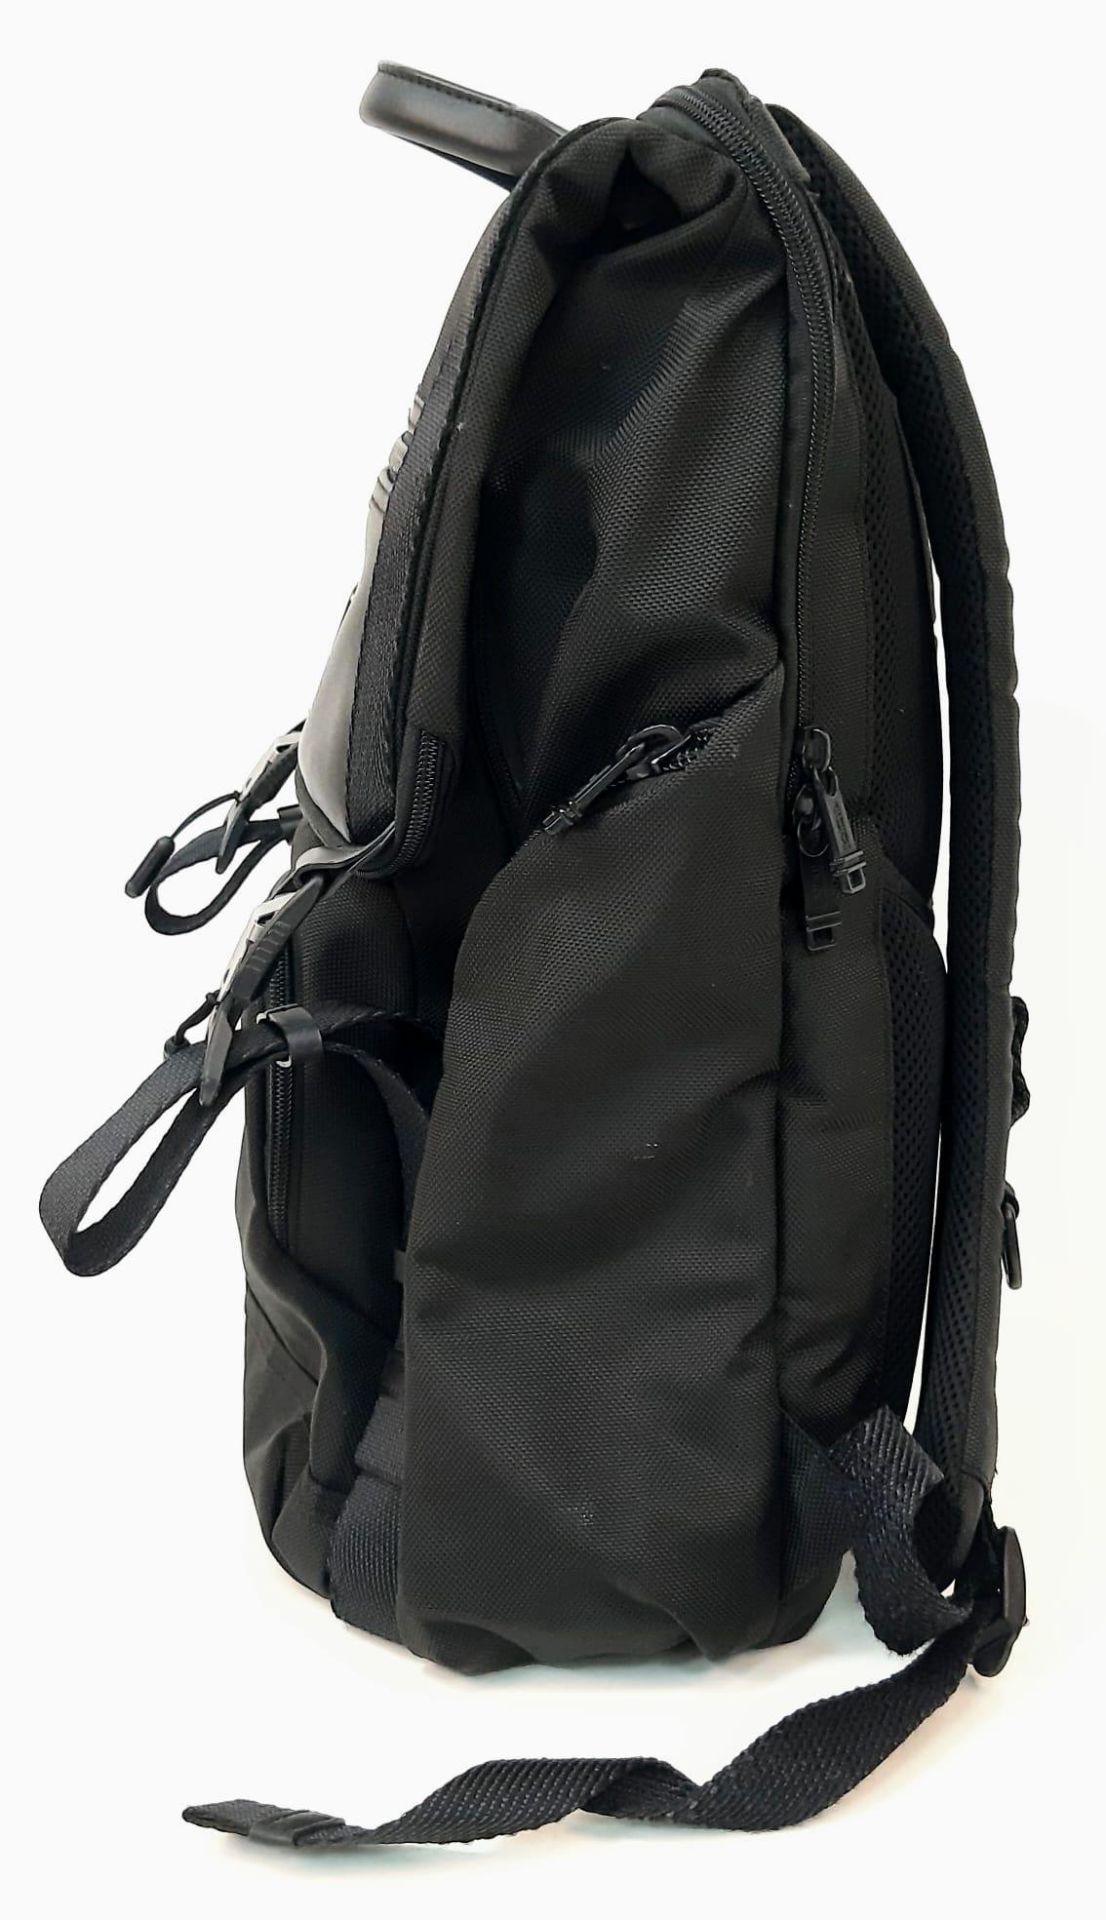 A TUMI Lark Black Backpack, 23L Capacity, Pockets for 16" Laptop, Tablet, Phone and Water Bottle. - Image 2 of 6